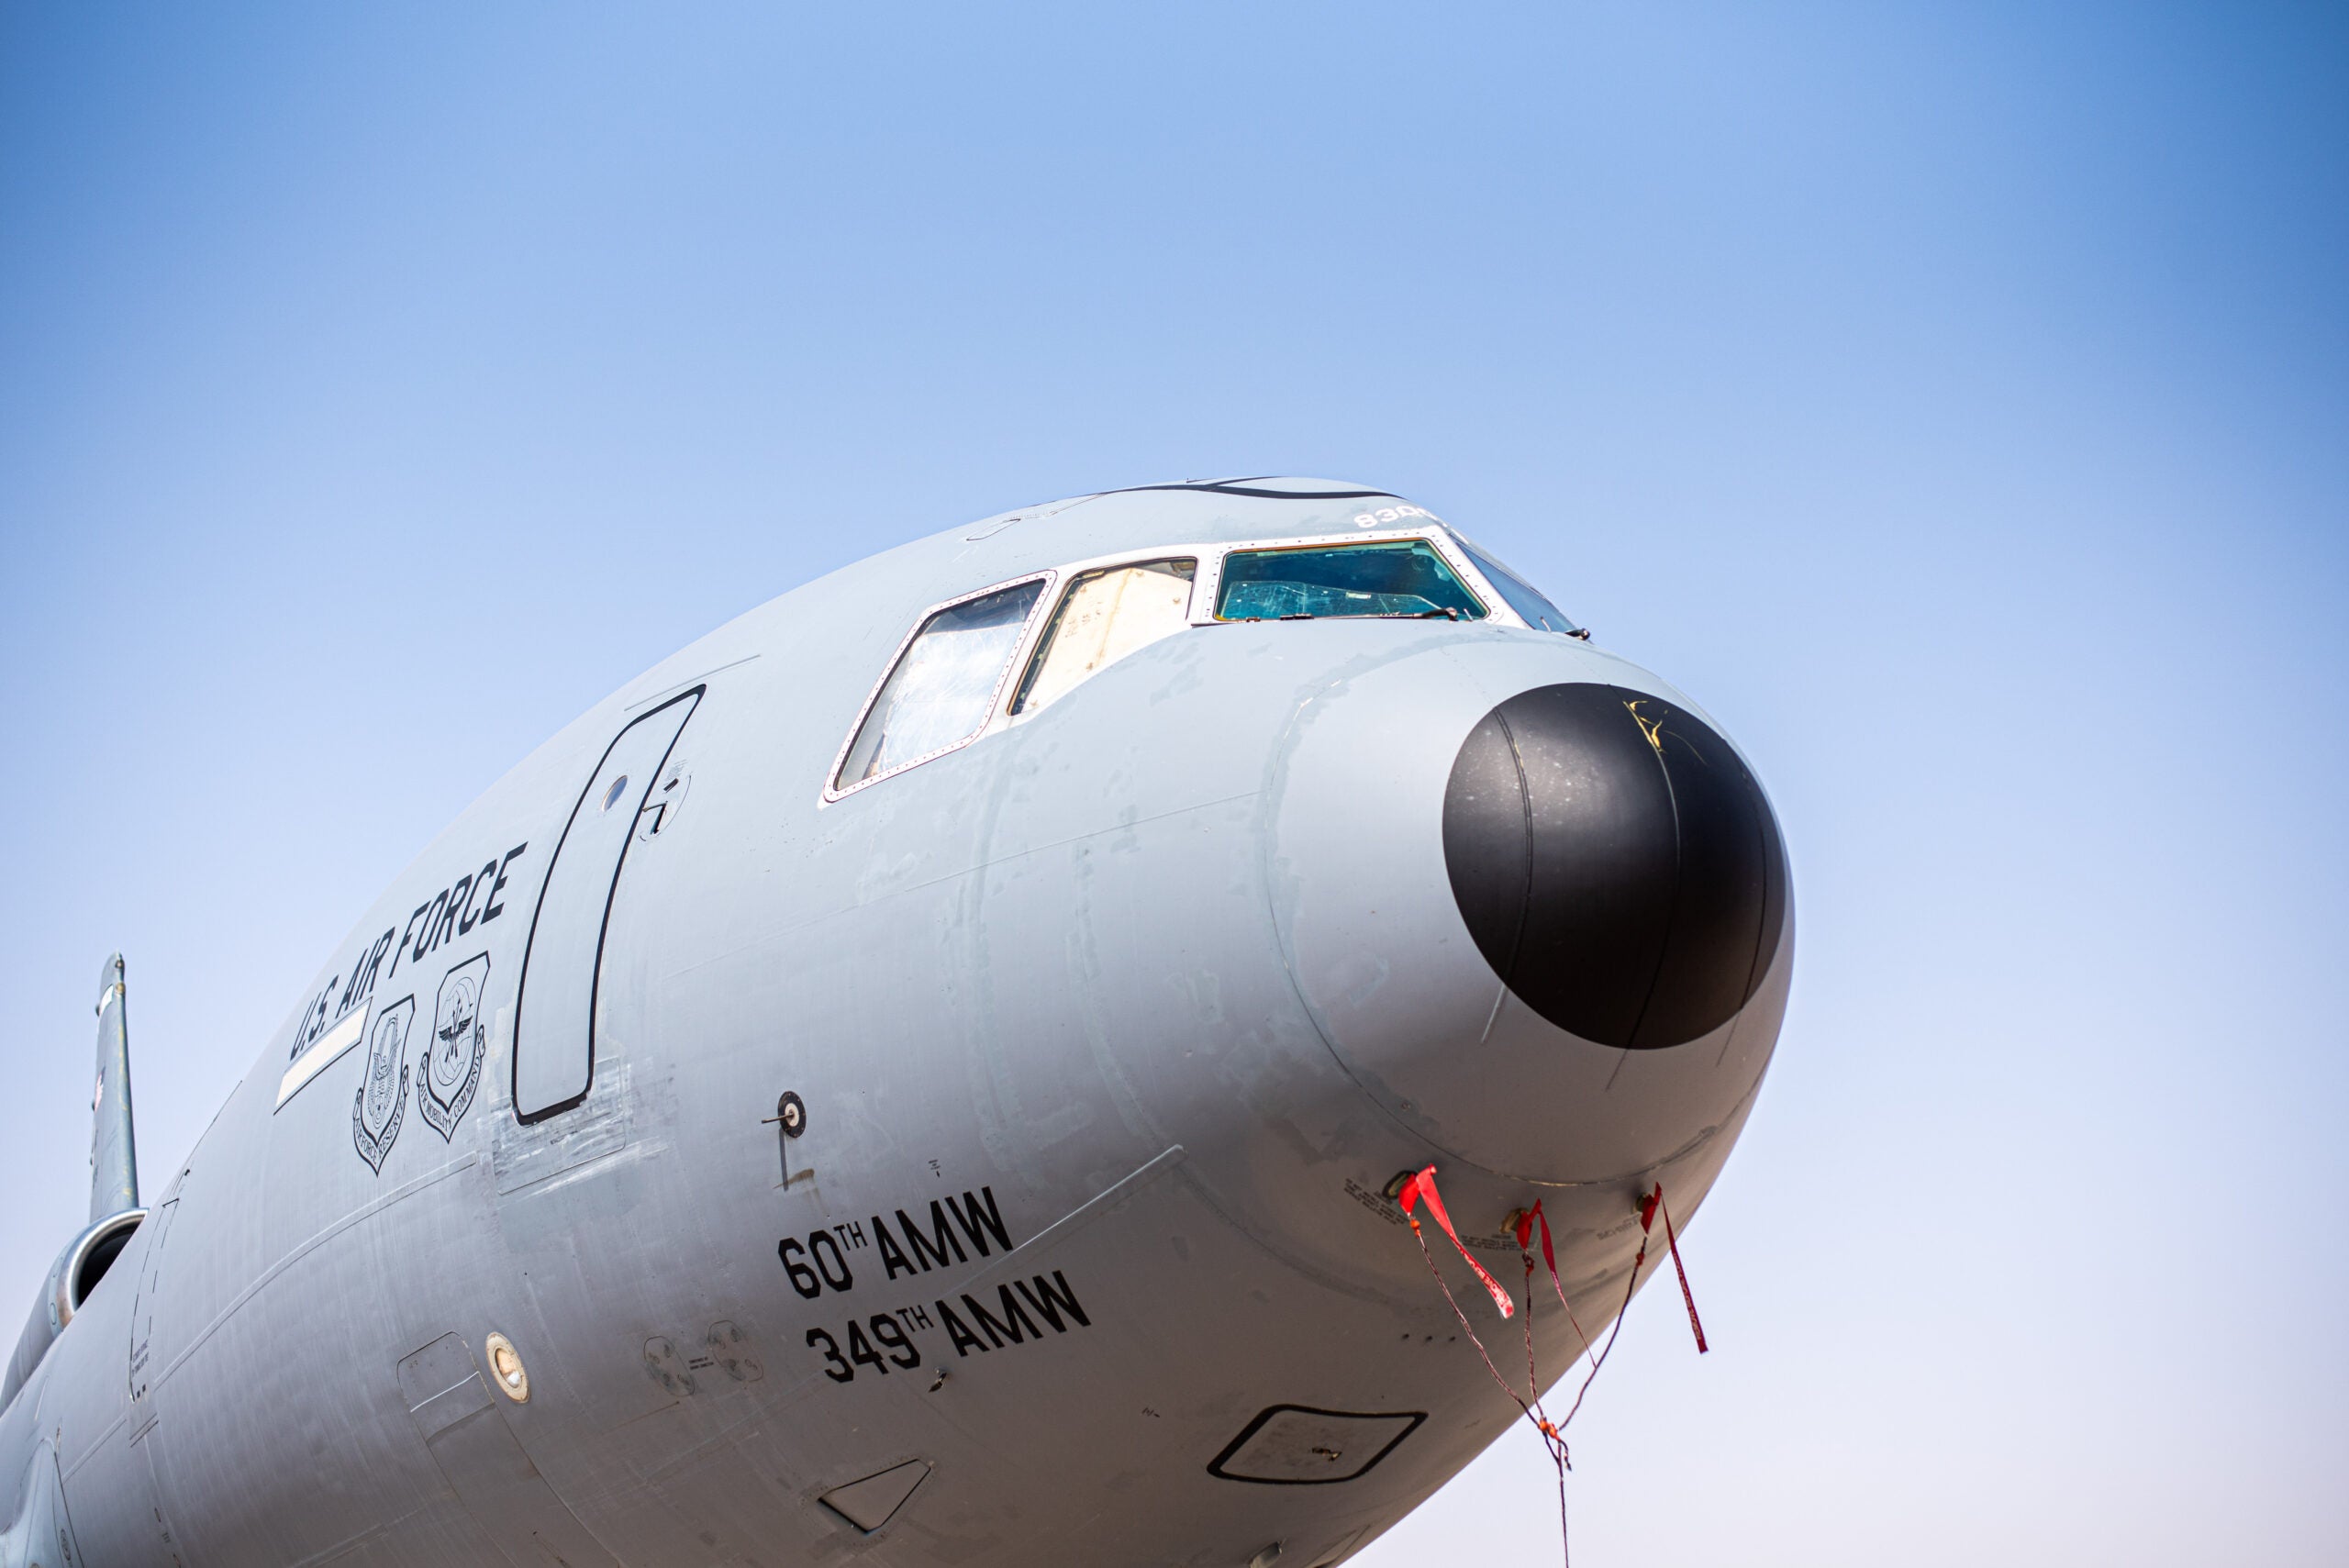 A KC-10 Extender sits on display after an inactivation ceremony for the 908th Expeditionary Air Refueling Squadron at Prince Sultan Air Base, Kingdom of Saudi Arabia, Oct. 4, 2023. The ceremony highlighted the legacy of the KC-10 after over 30 years of service within the U.S. Air Forces Central (AFCENT) Area of Responsibility. By September 2024, the U.S. Air Force's fleet of KC-10s will be decommissioned and gradually replaced by the KC-46 aircraft. (U.S. Air Force photo by Tech. Sgt. Alexander Frank)